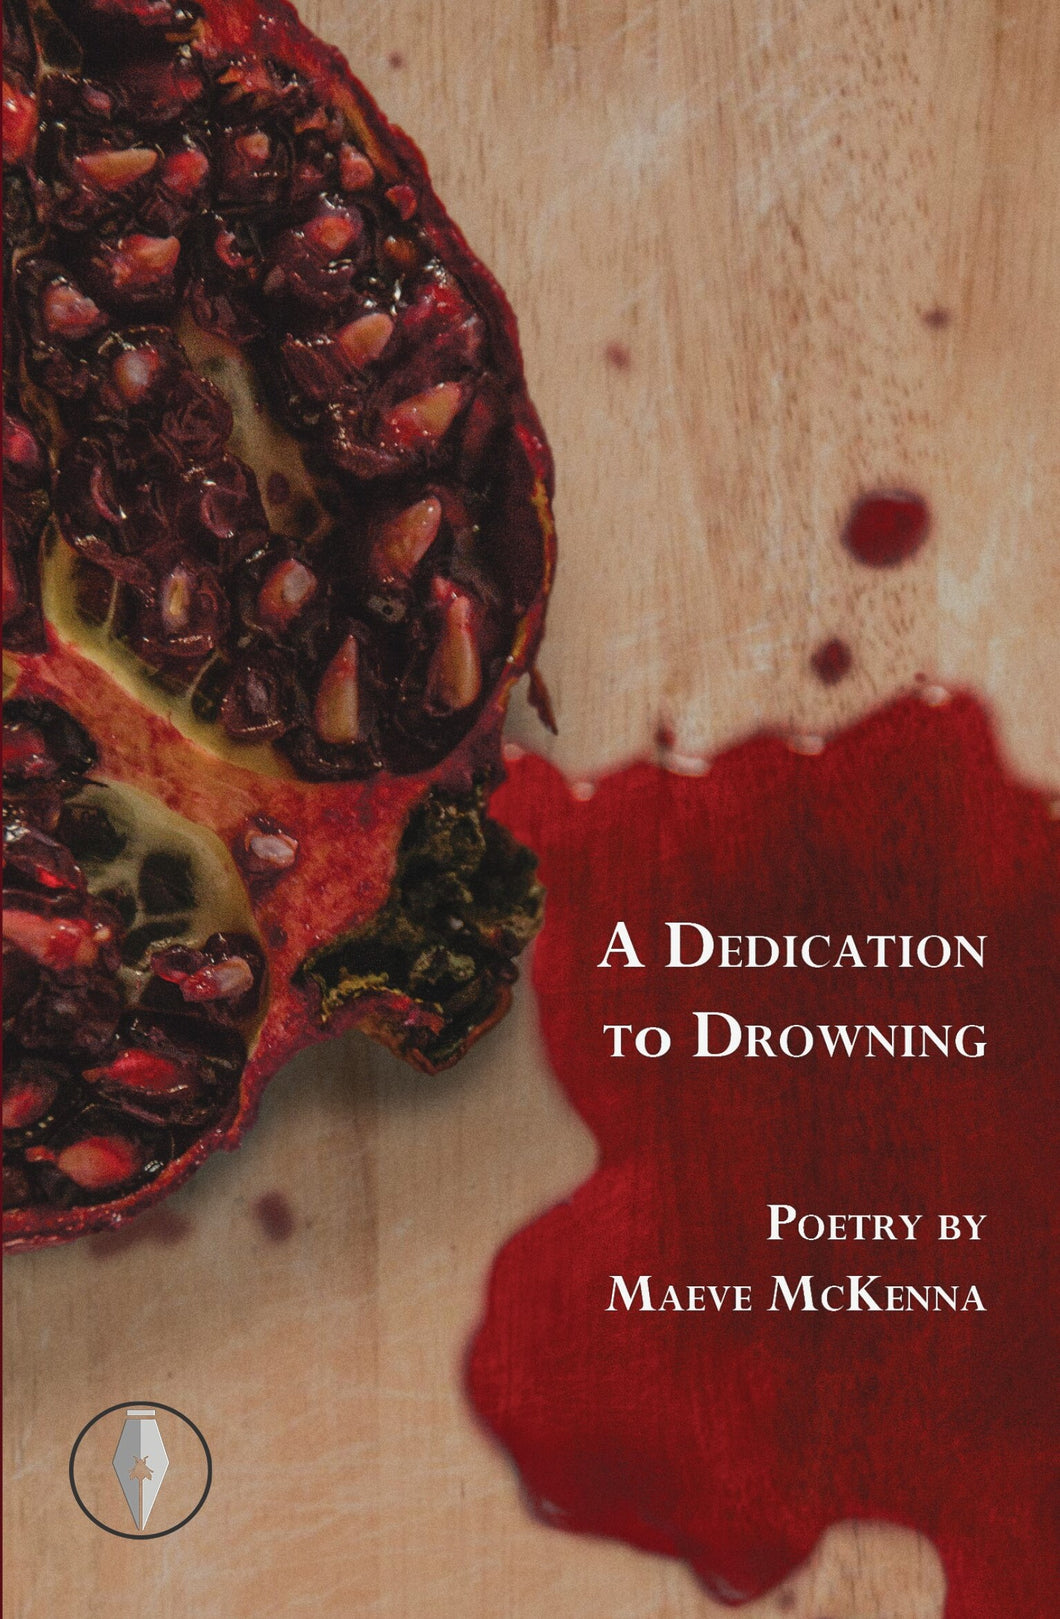 A Dedication to Drowning